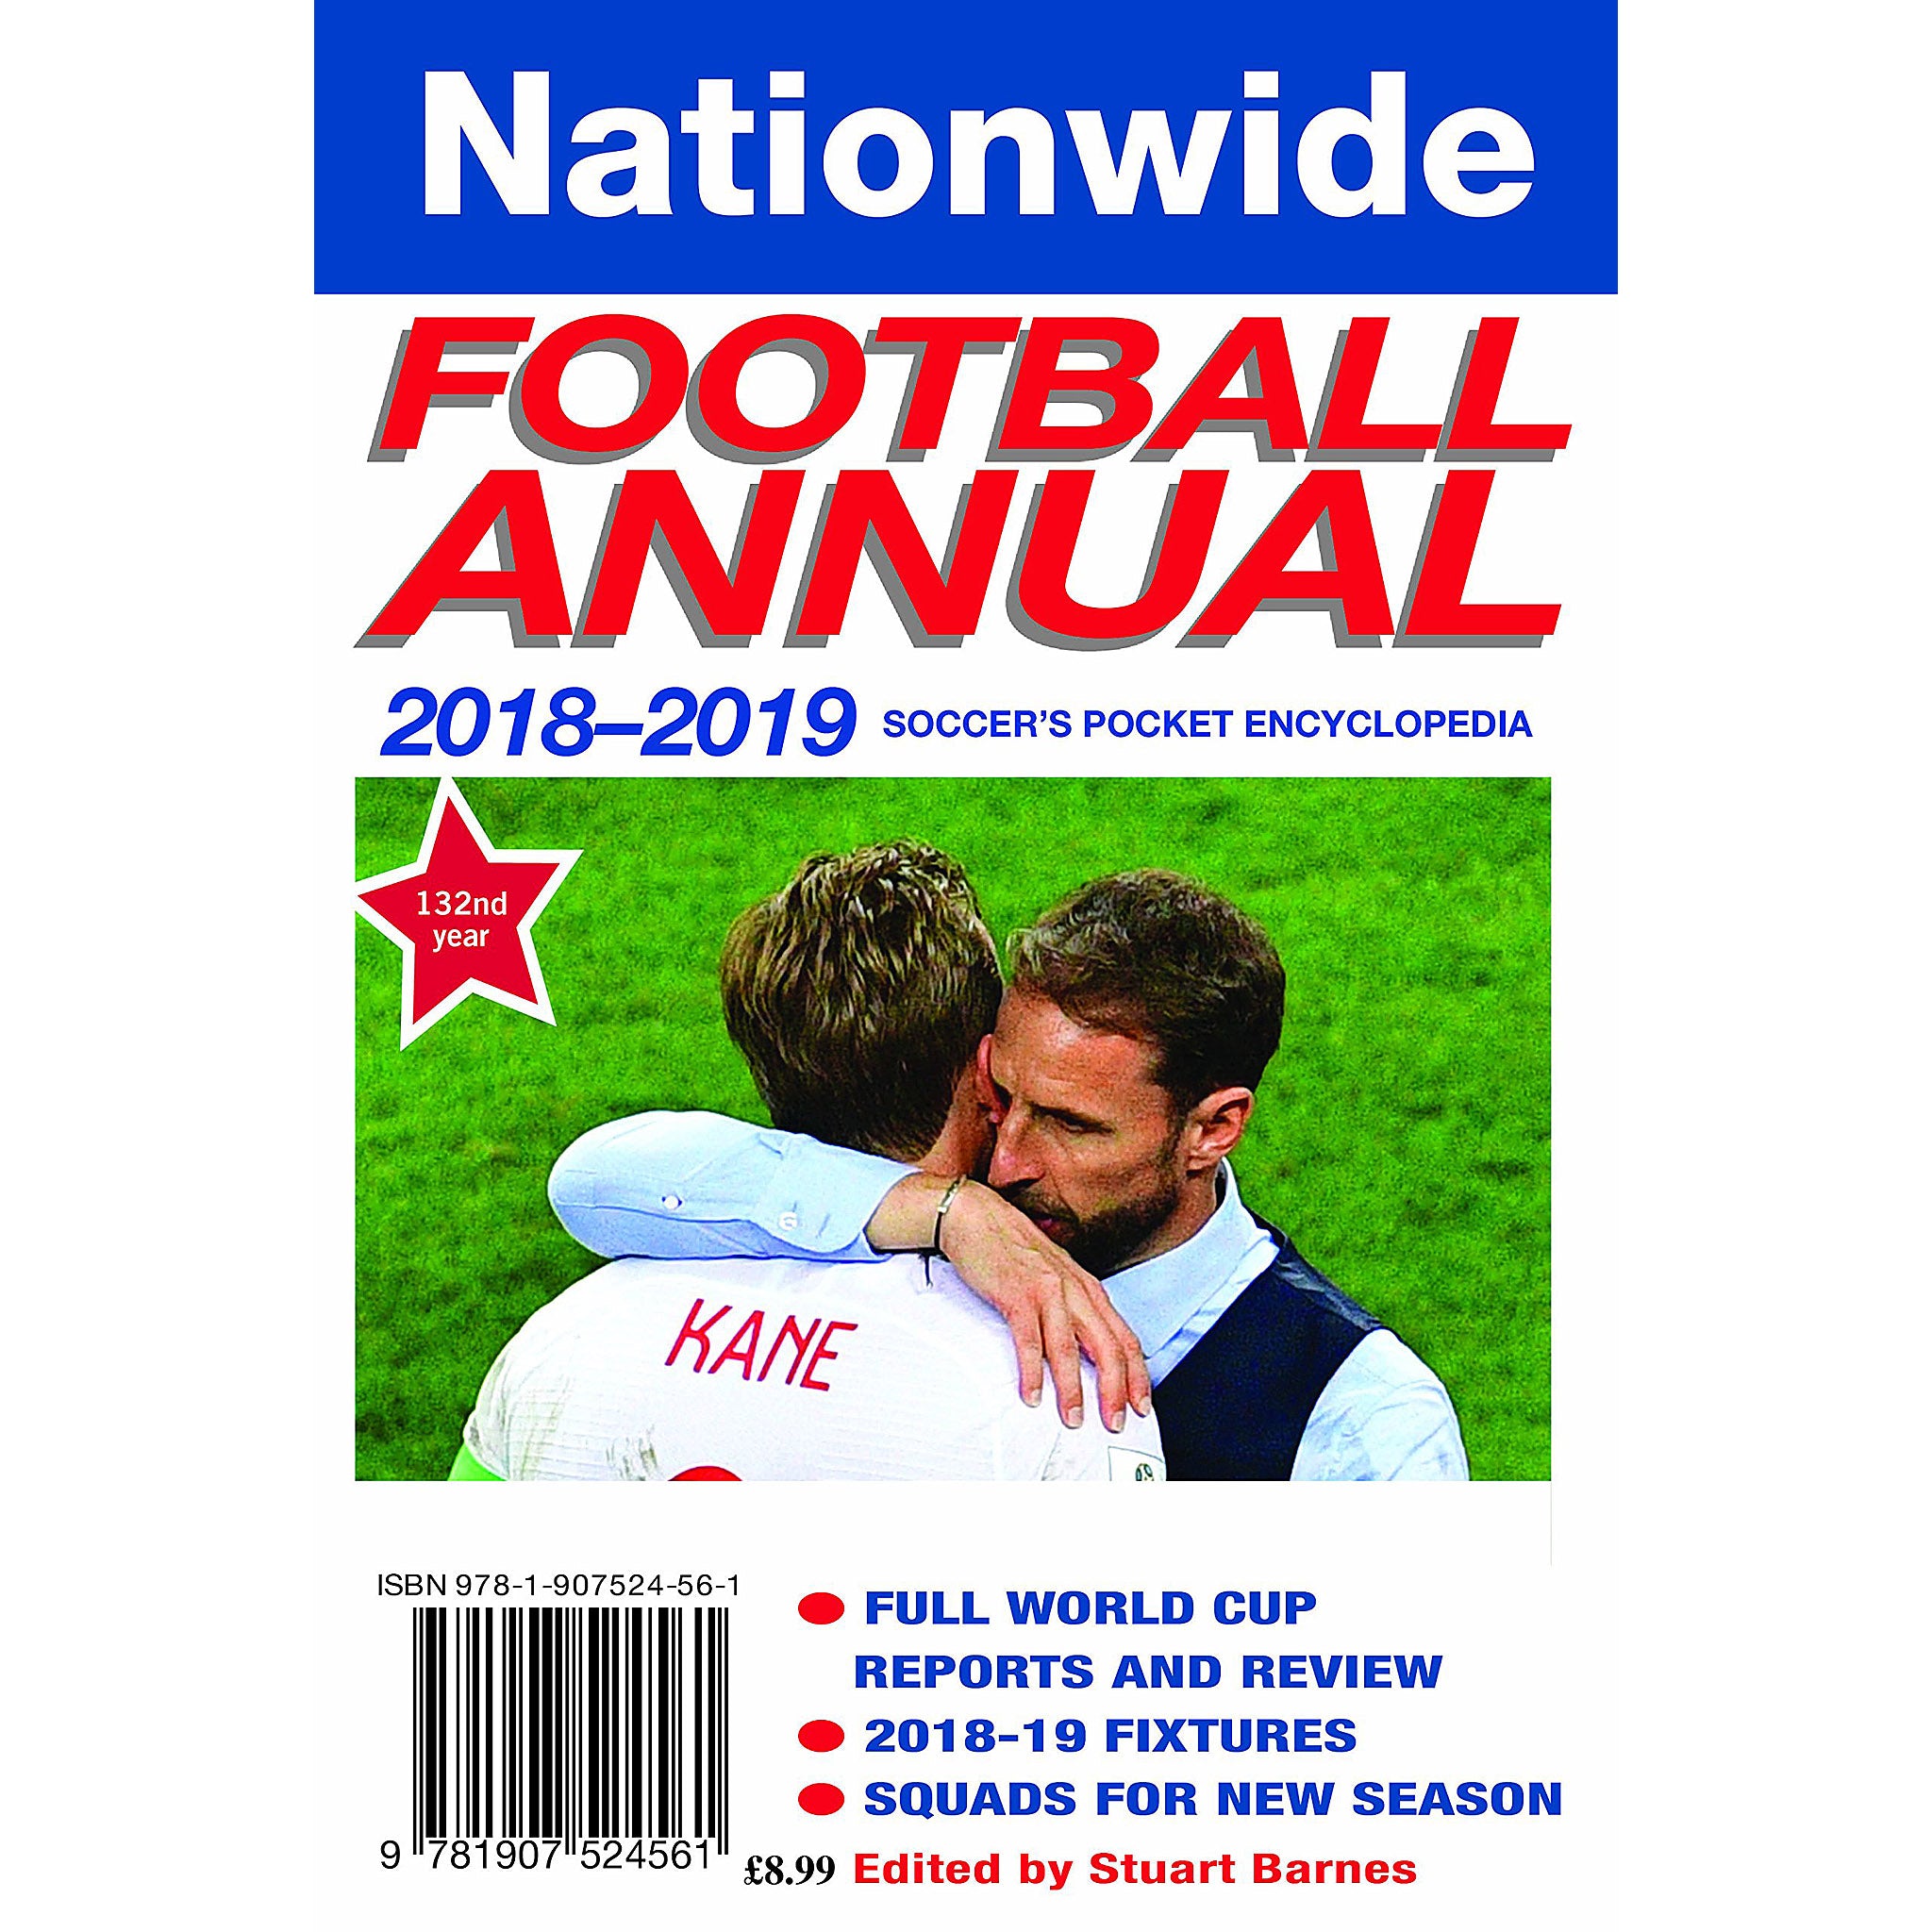 Nationwide Football Annual 2018-2019 (News of the World)